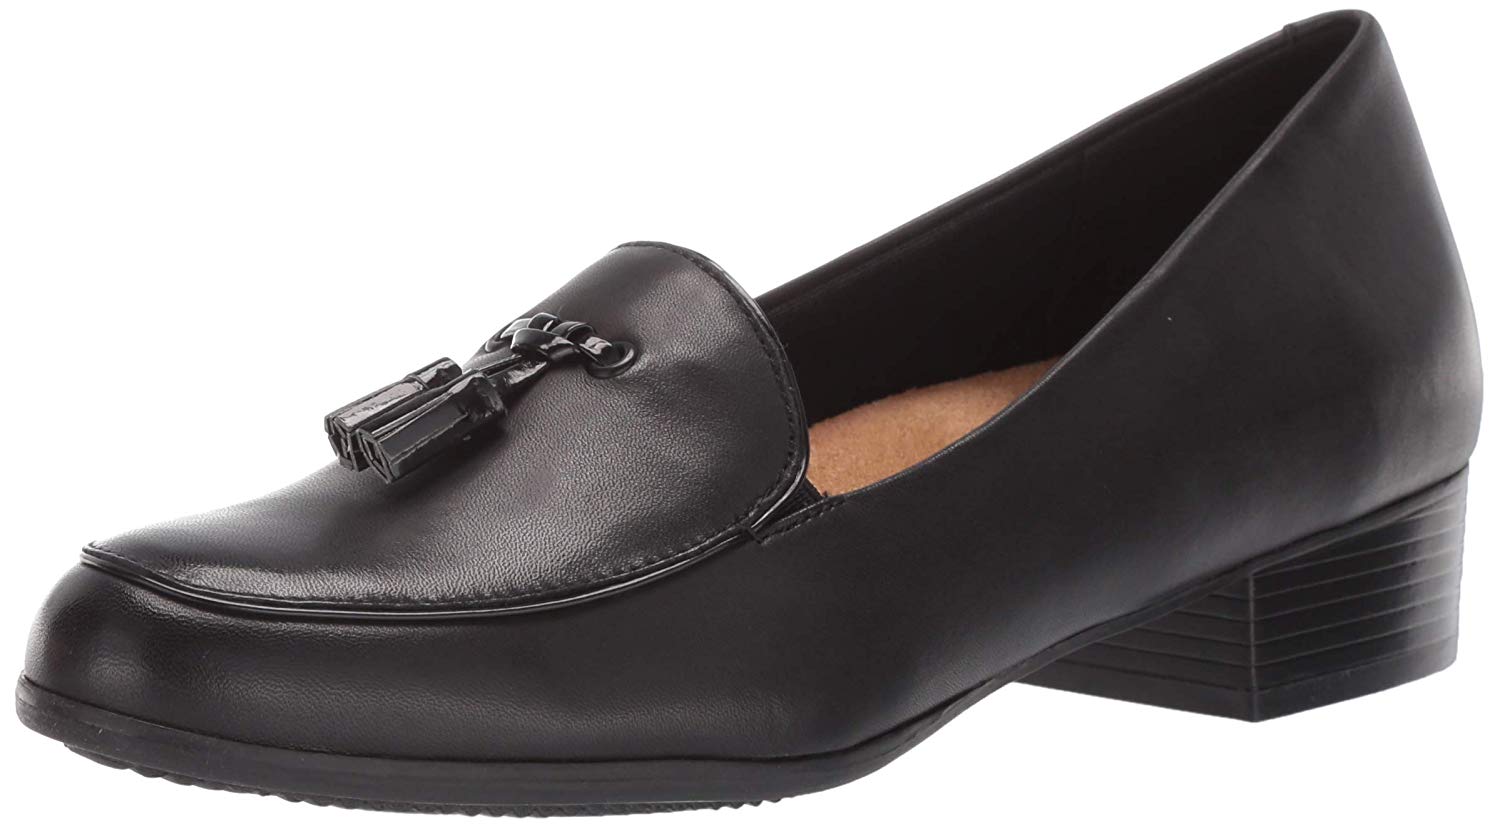 Trotters Womens Mary Leather Round Toe Loafers